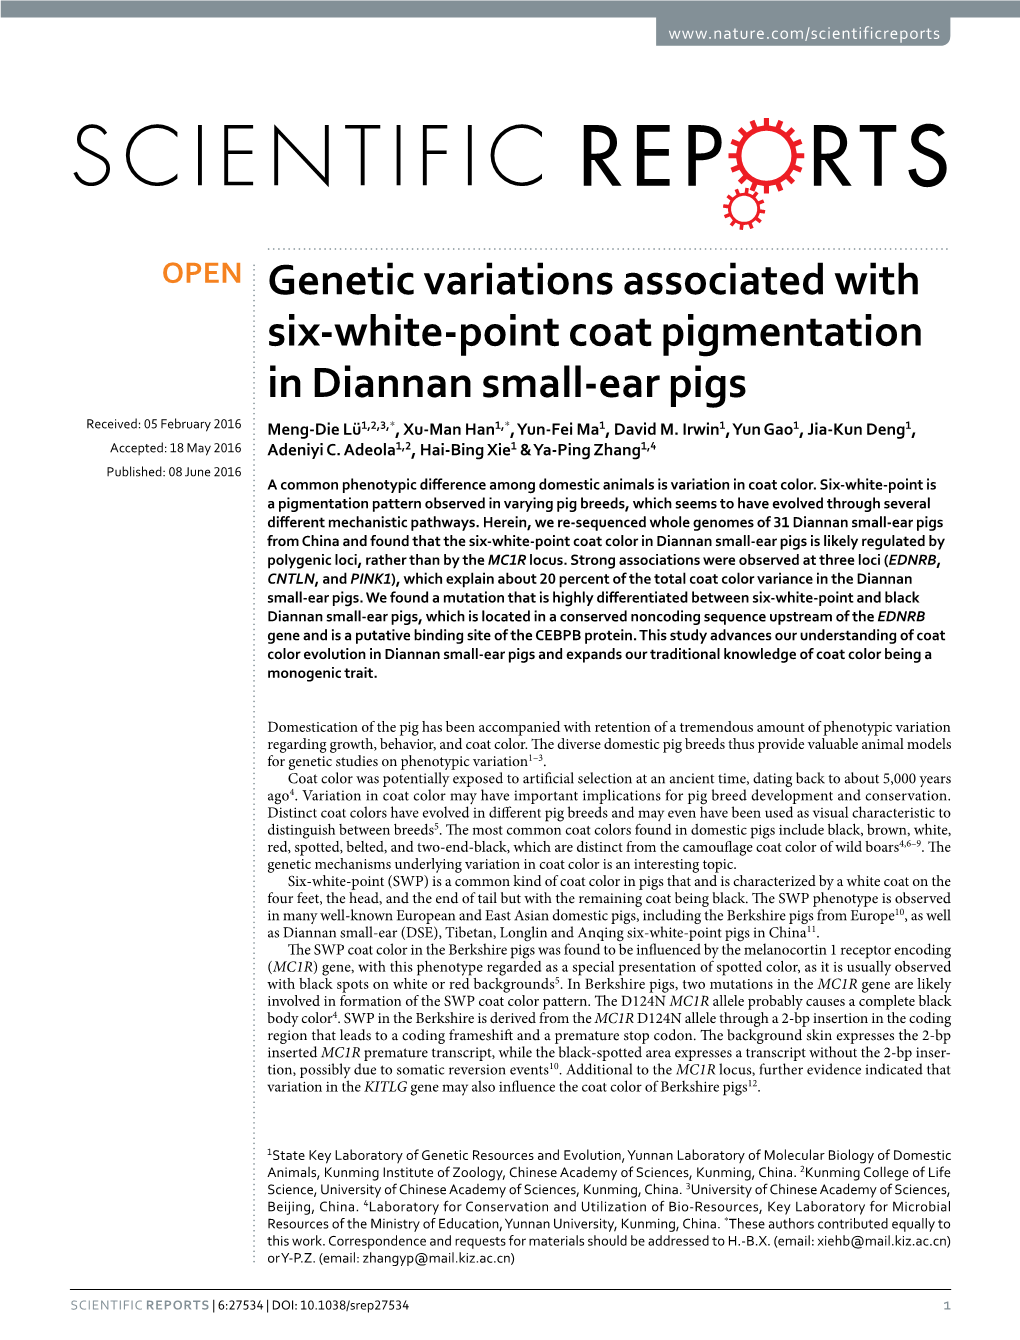 Genetic Variations Associated with Six-White-Point Coat Pigmentation In